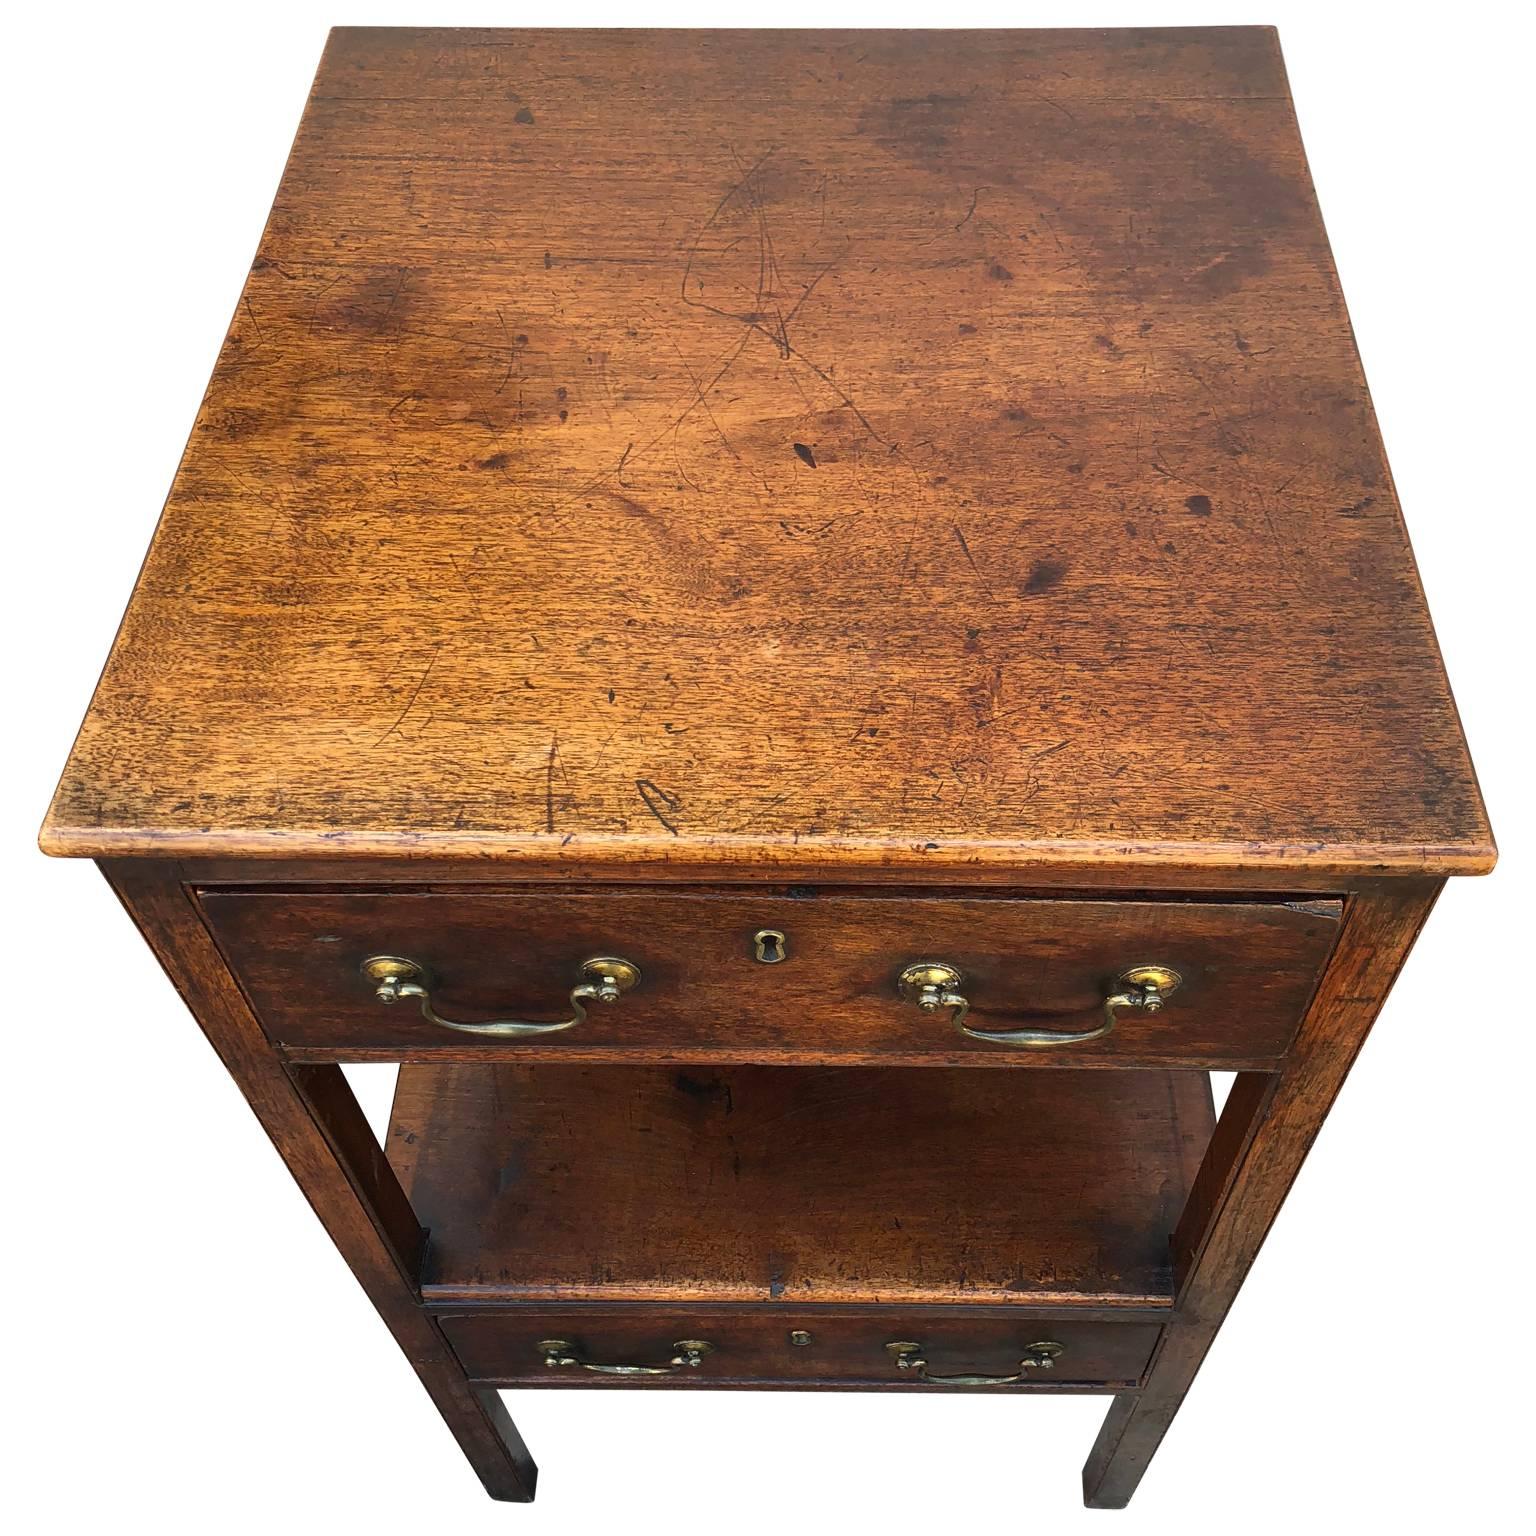 Hand-Crafted Tall Two-Drawer Desk or Chest